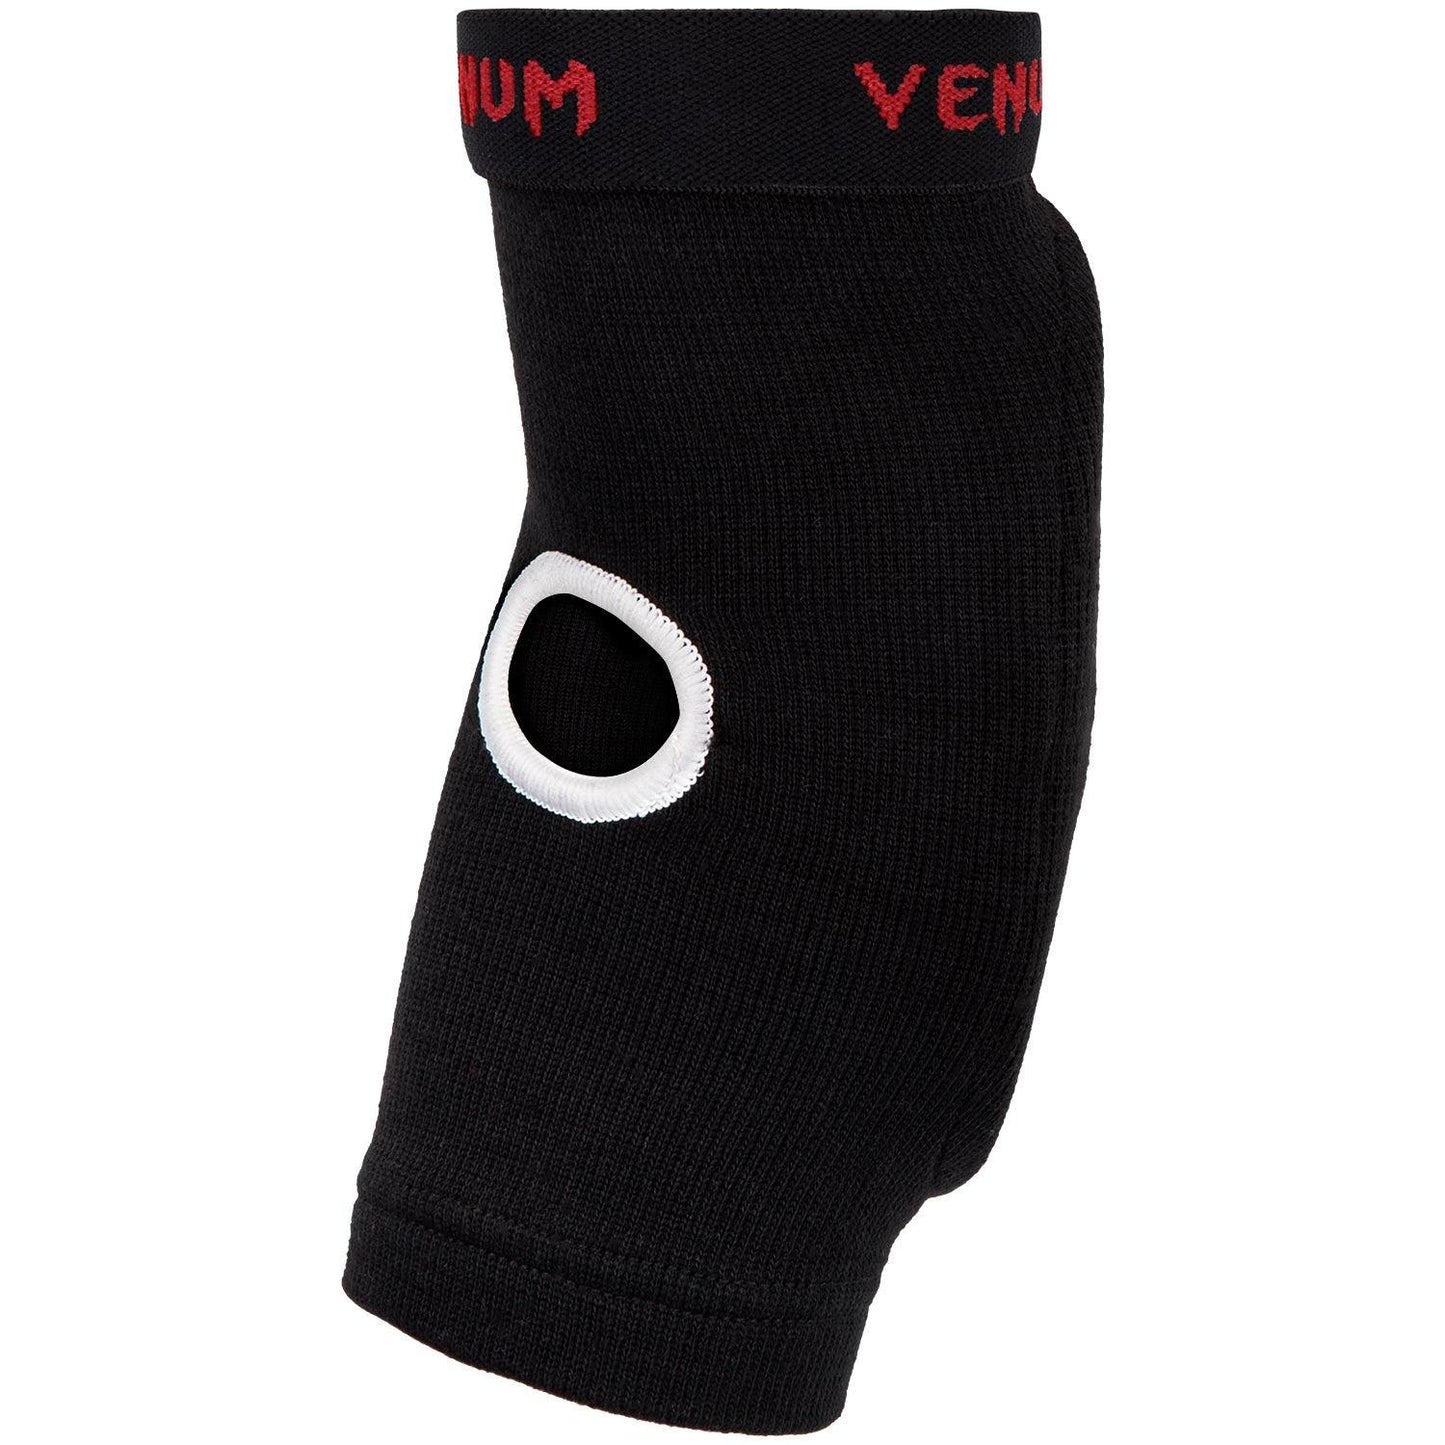 Venum Kontact Elbow Pads - Black/Red Picture 3